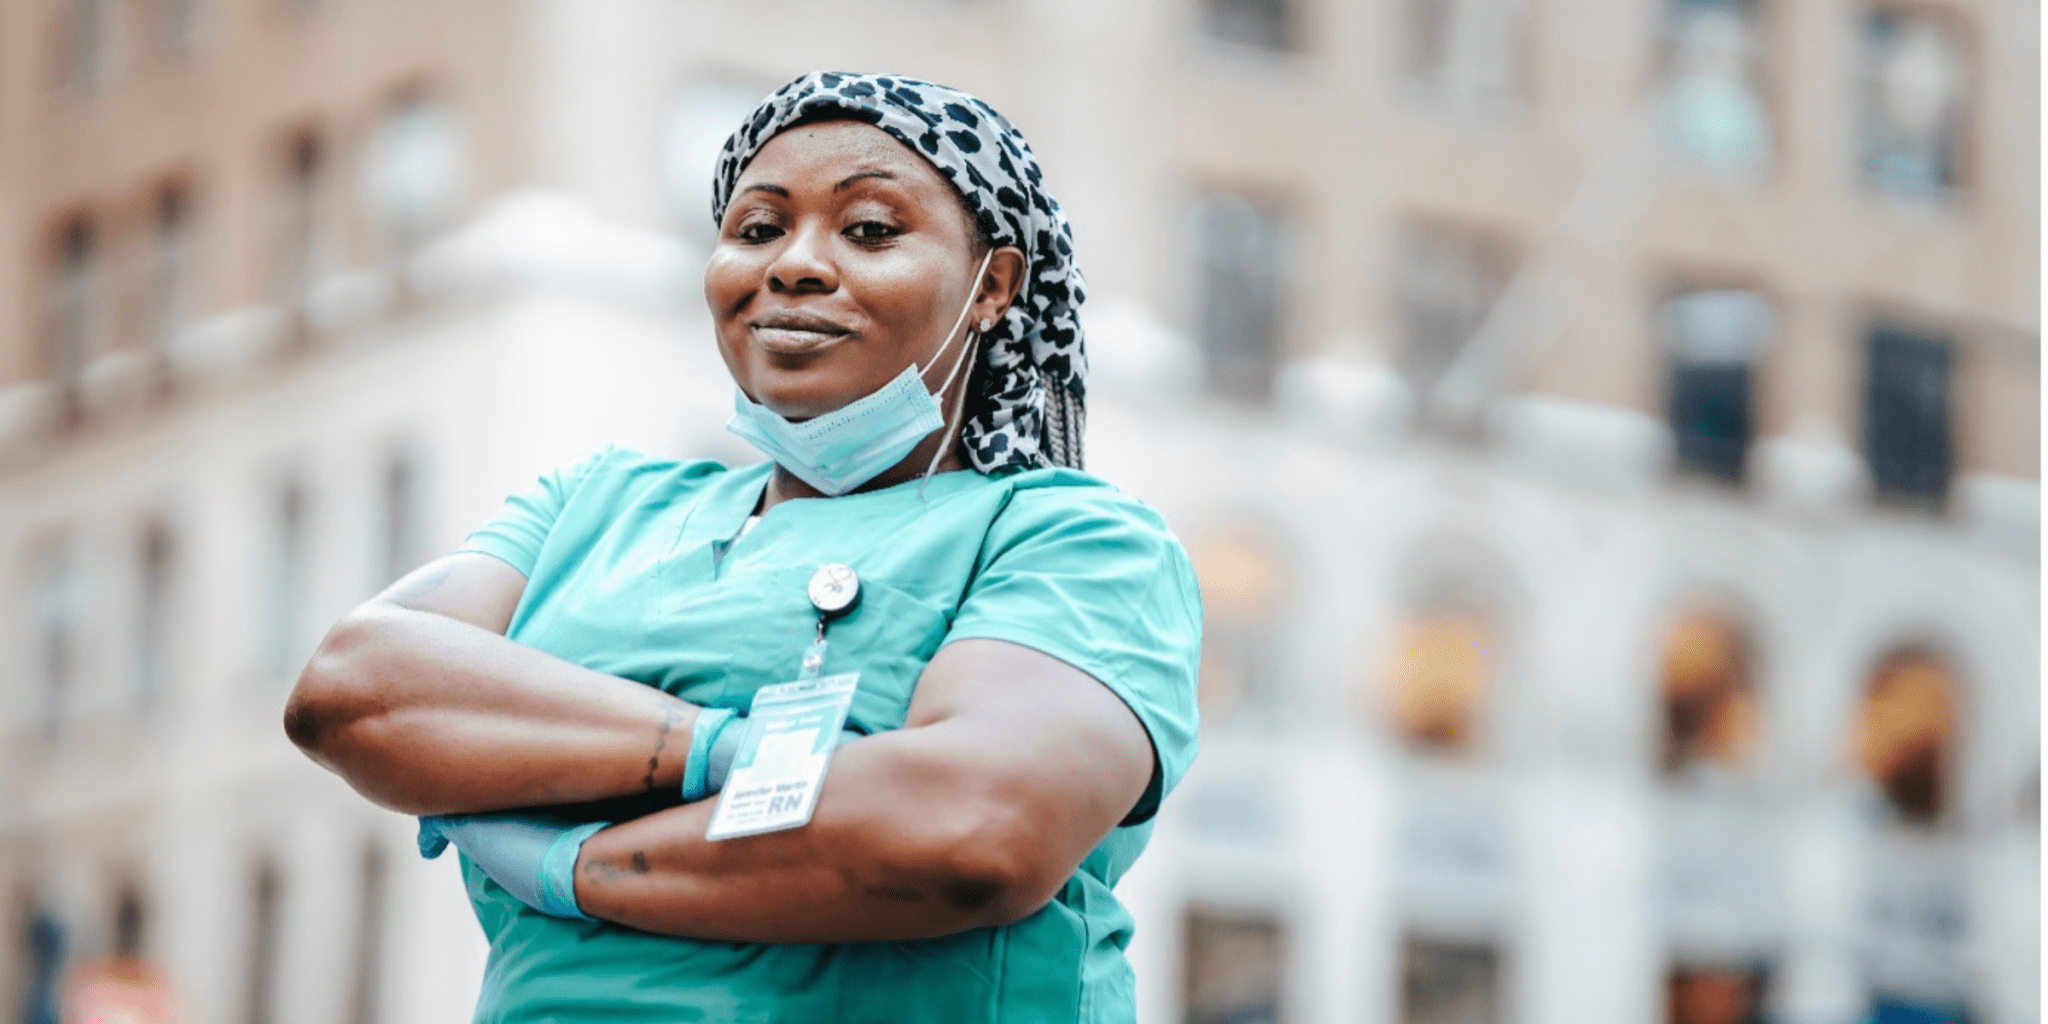 black woman chose nursing career standing in front of hospital where she works